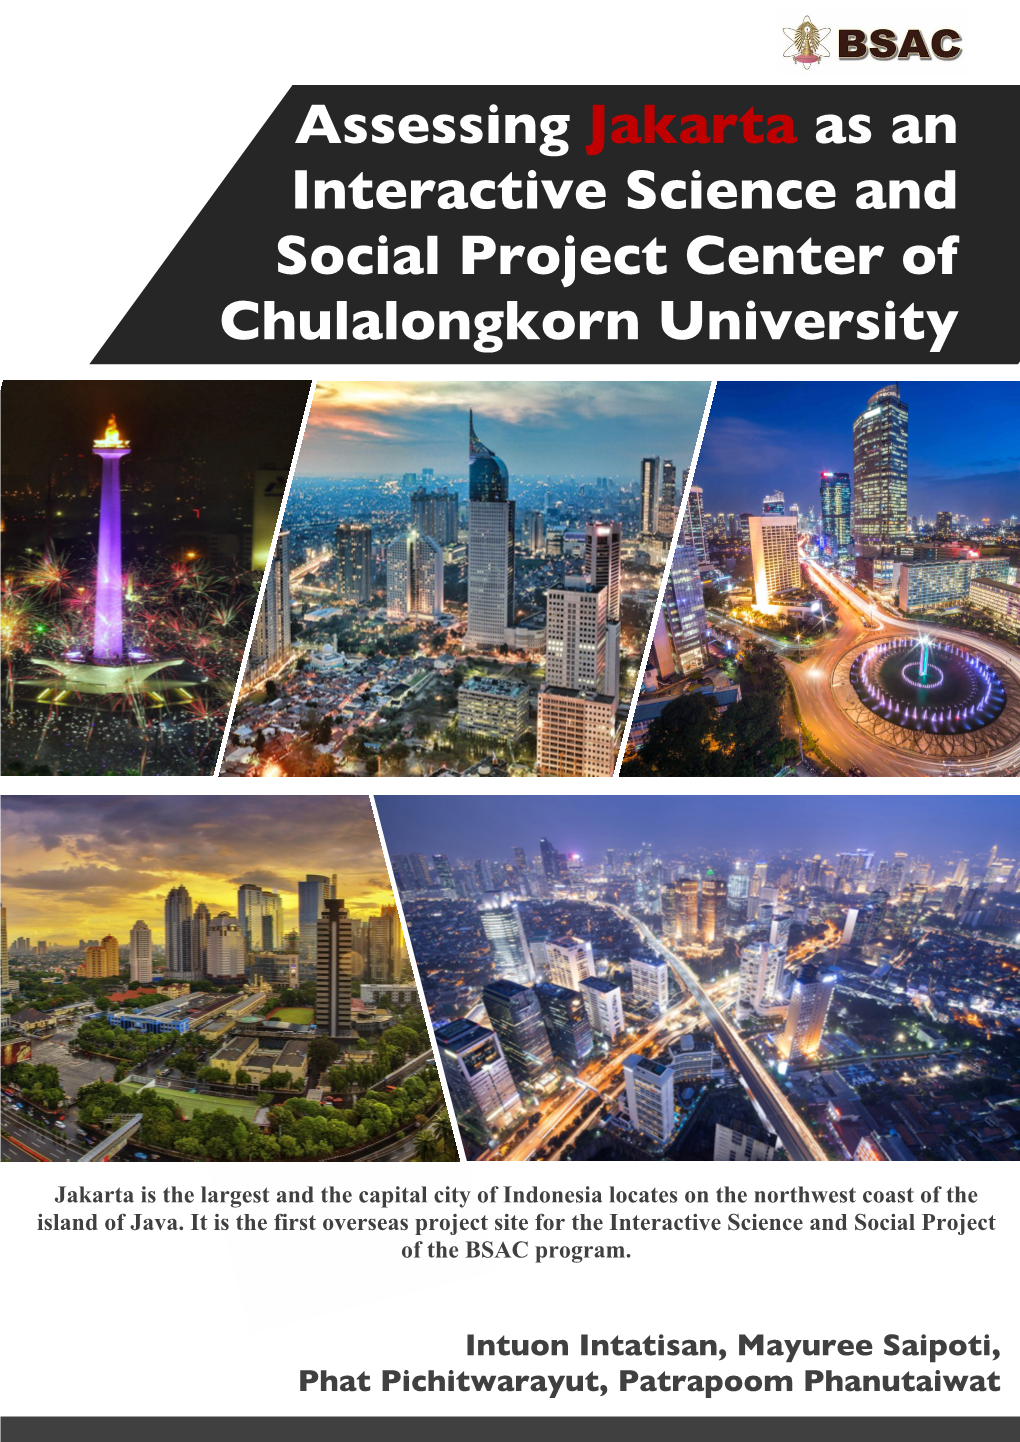 Assessing Jakarta As an Interactive Science and Social Project Center of Chulalongkorn University